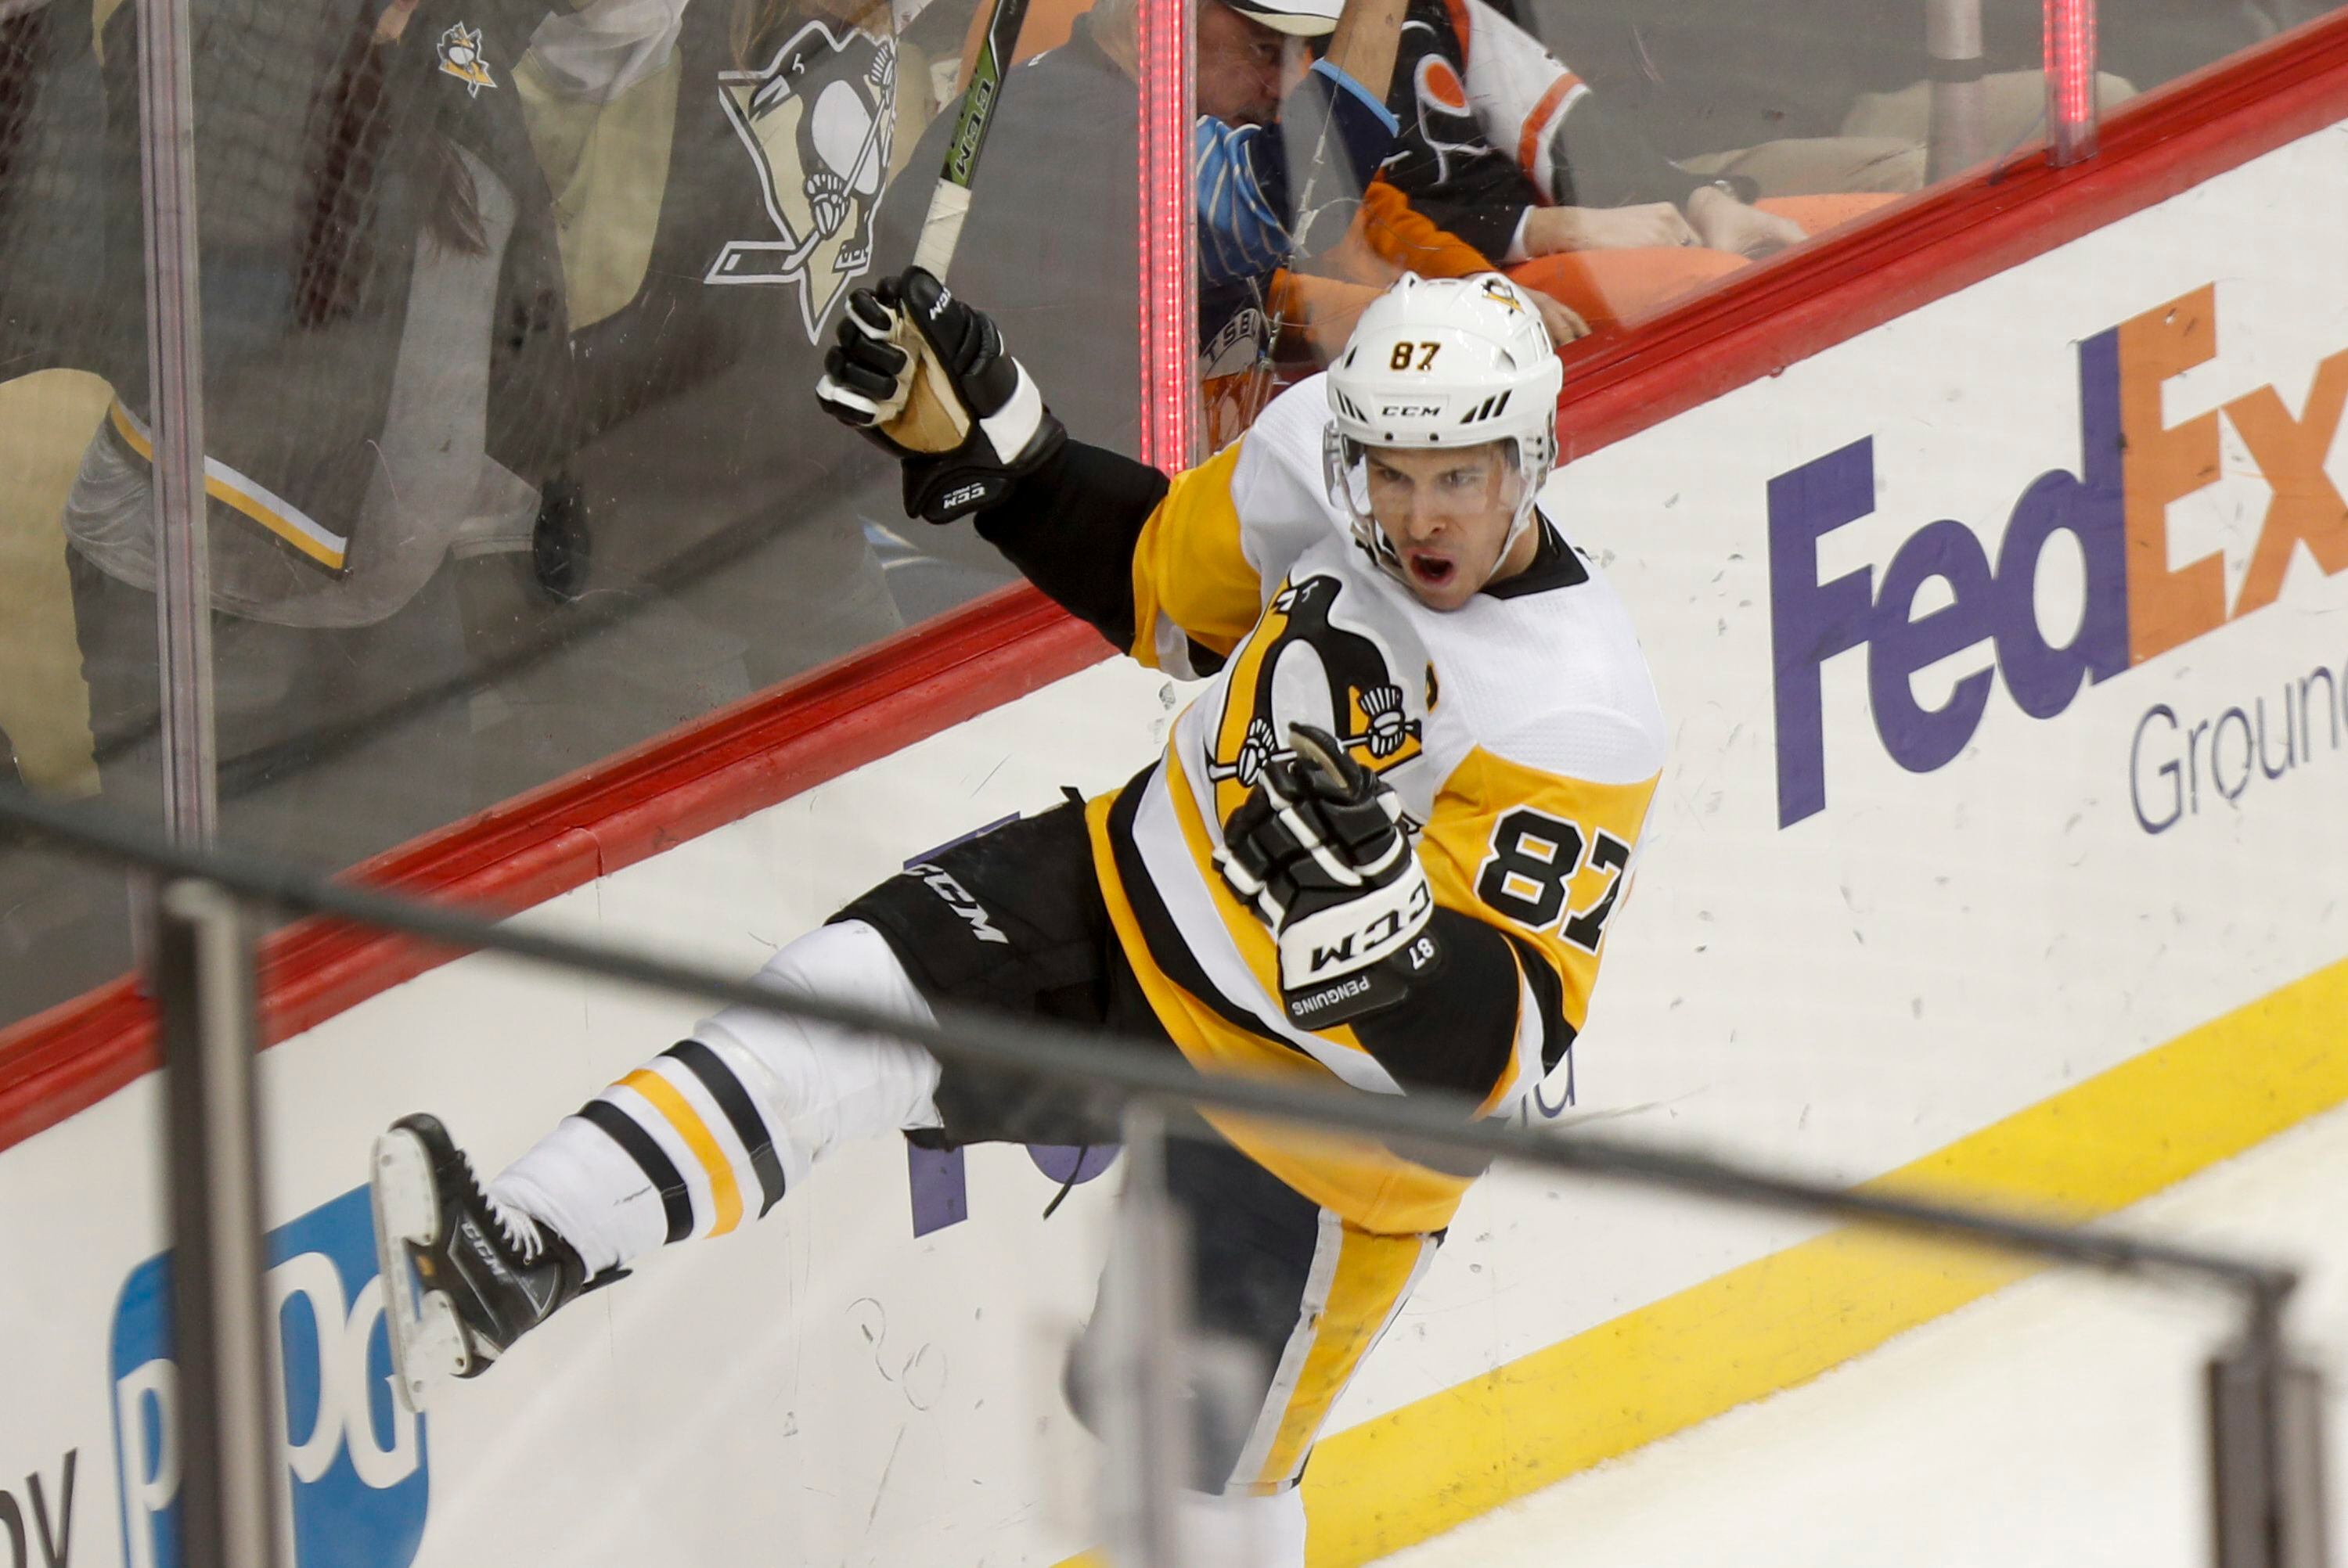 Around sports: Overtime win gives Penguins 3-1 series lead